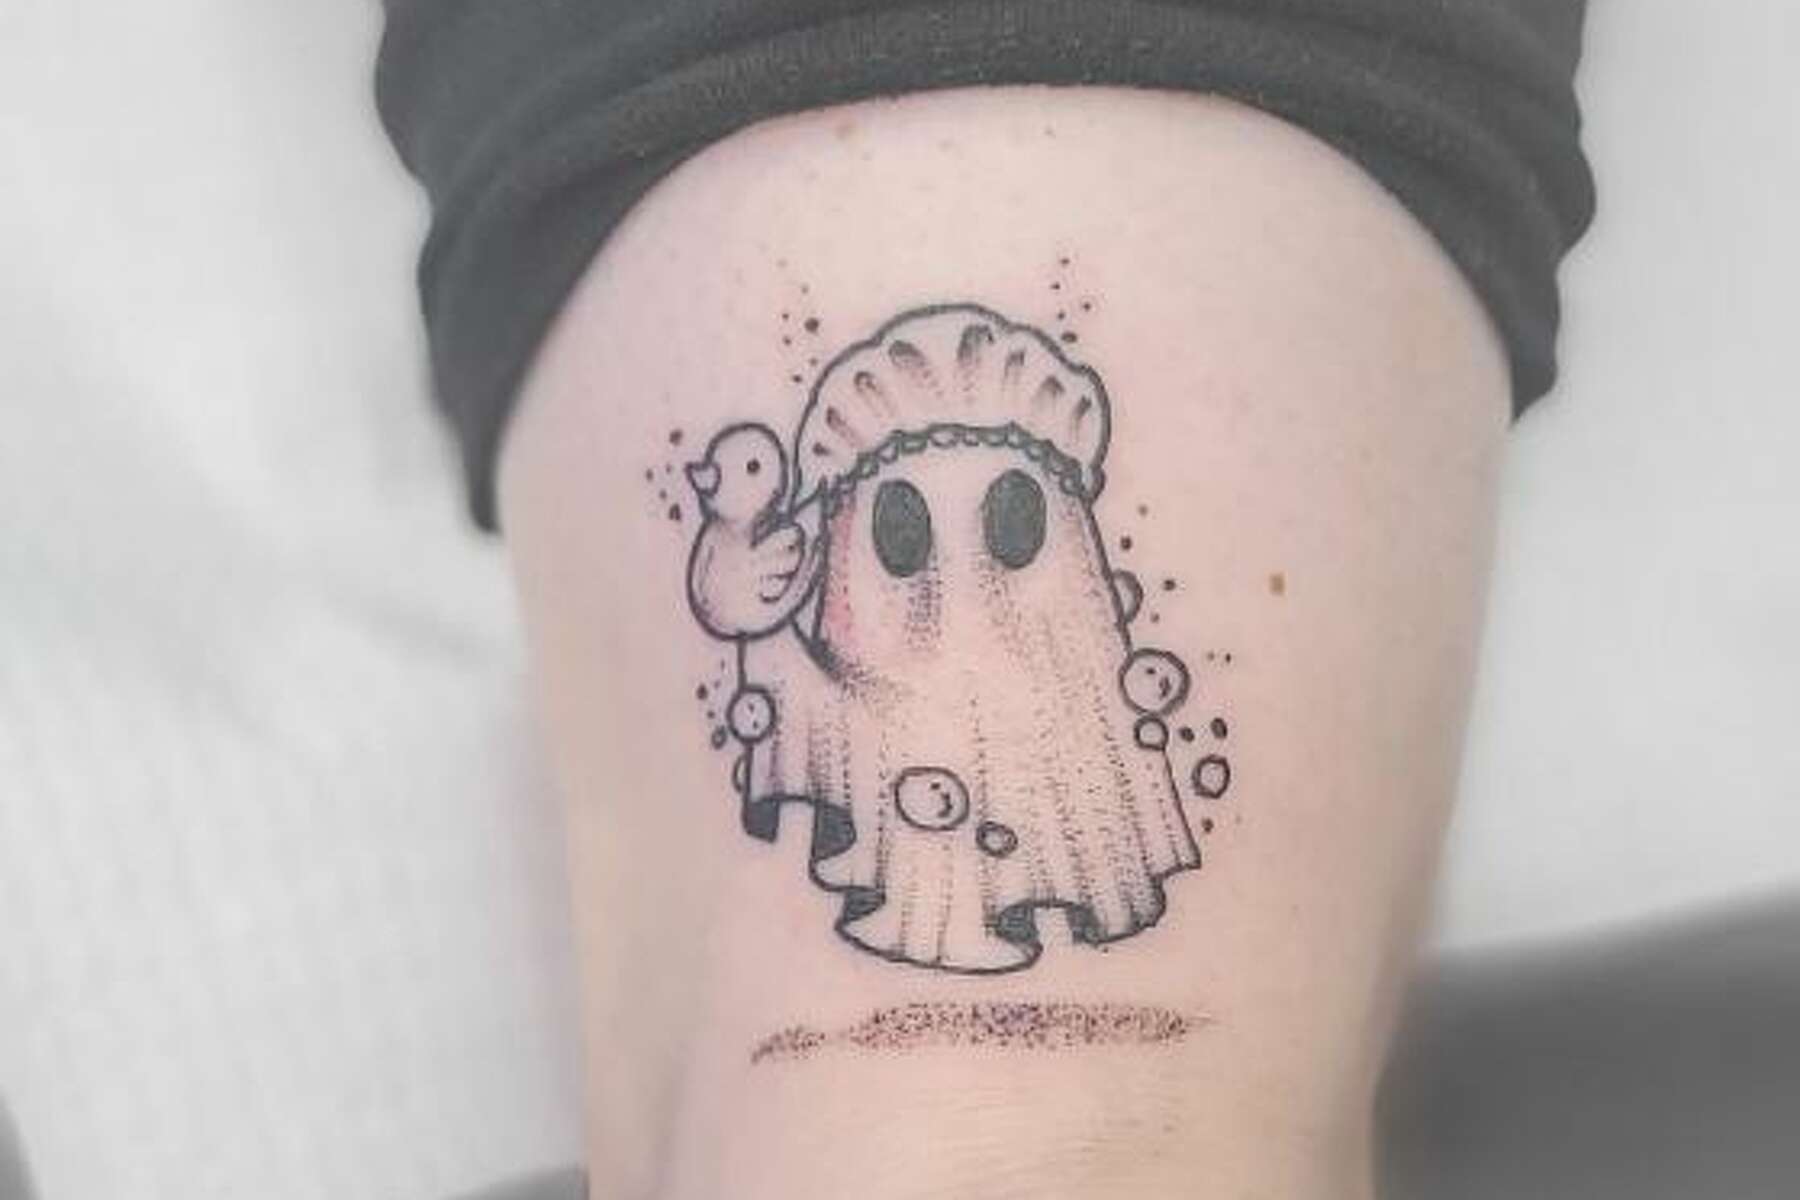 Lil ghost by Eli Ling at Short North Tattoo in Columbus OH   rtattoos